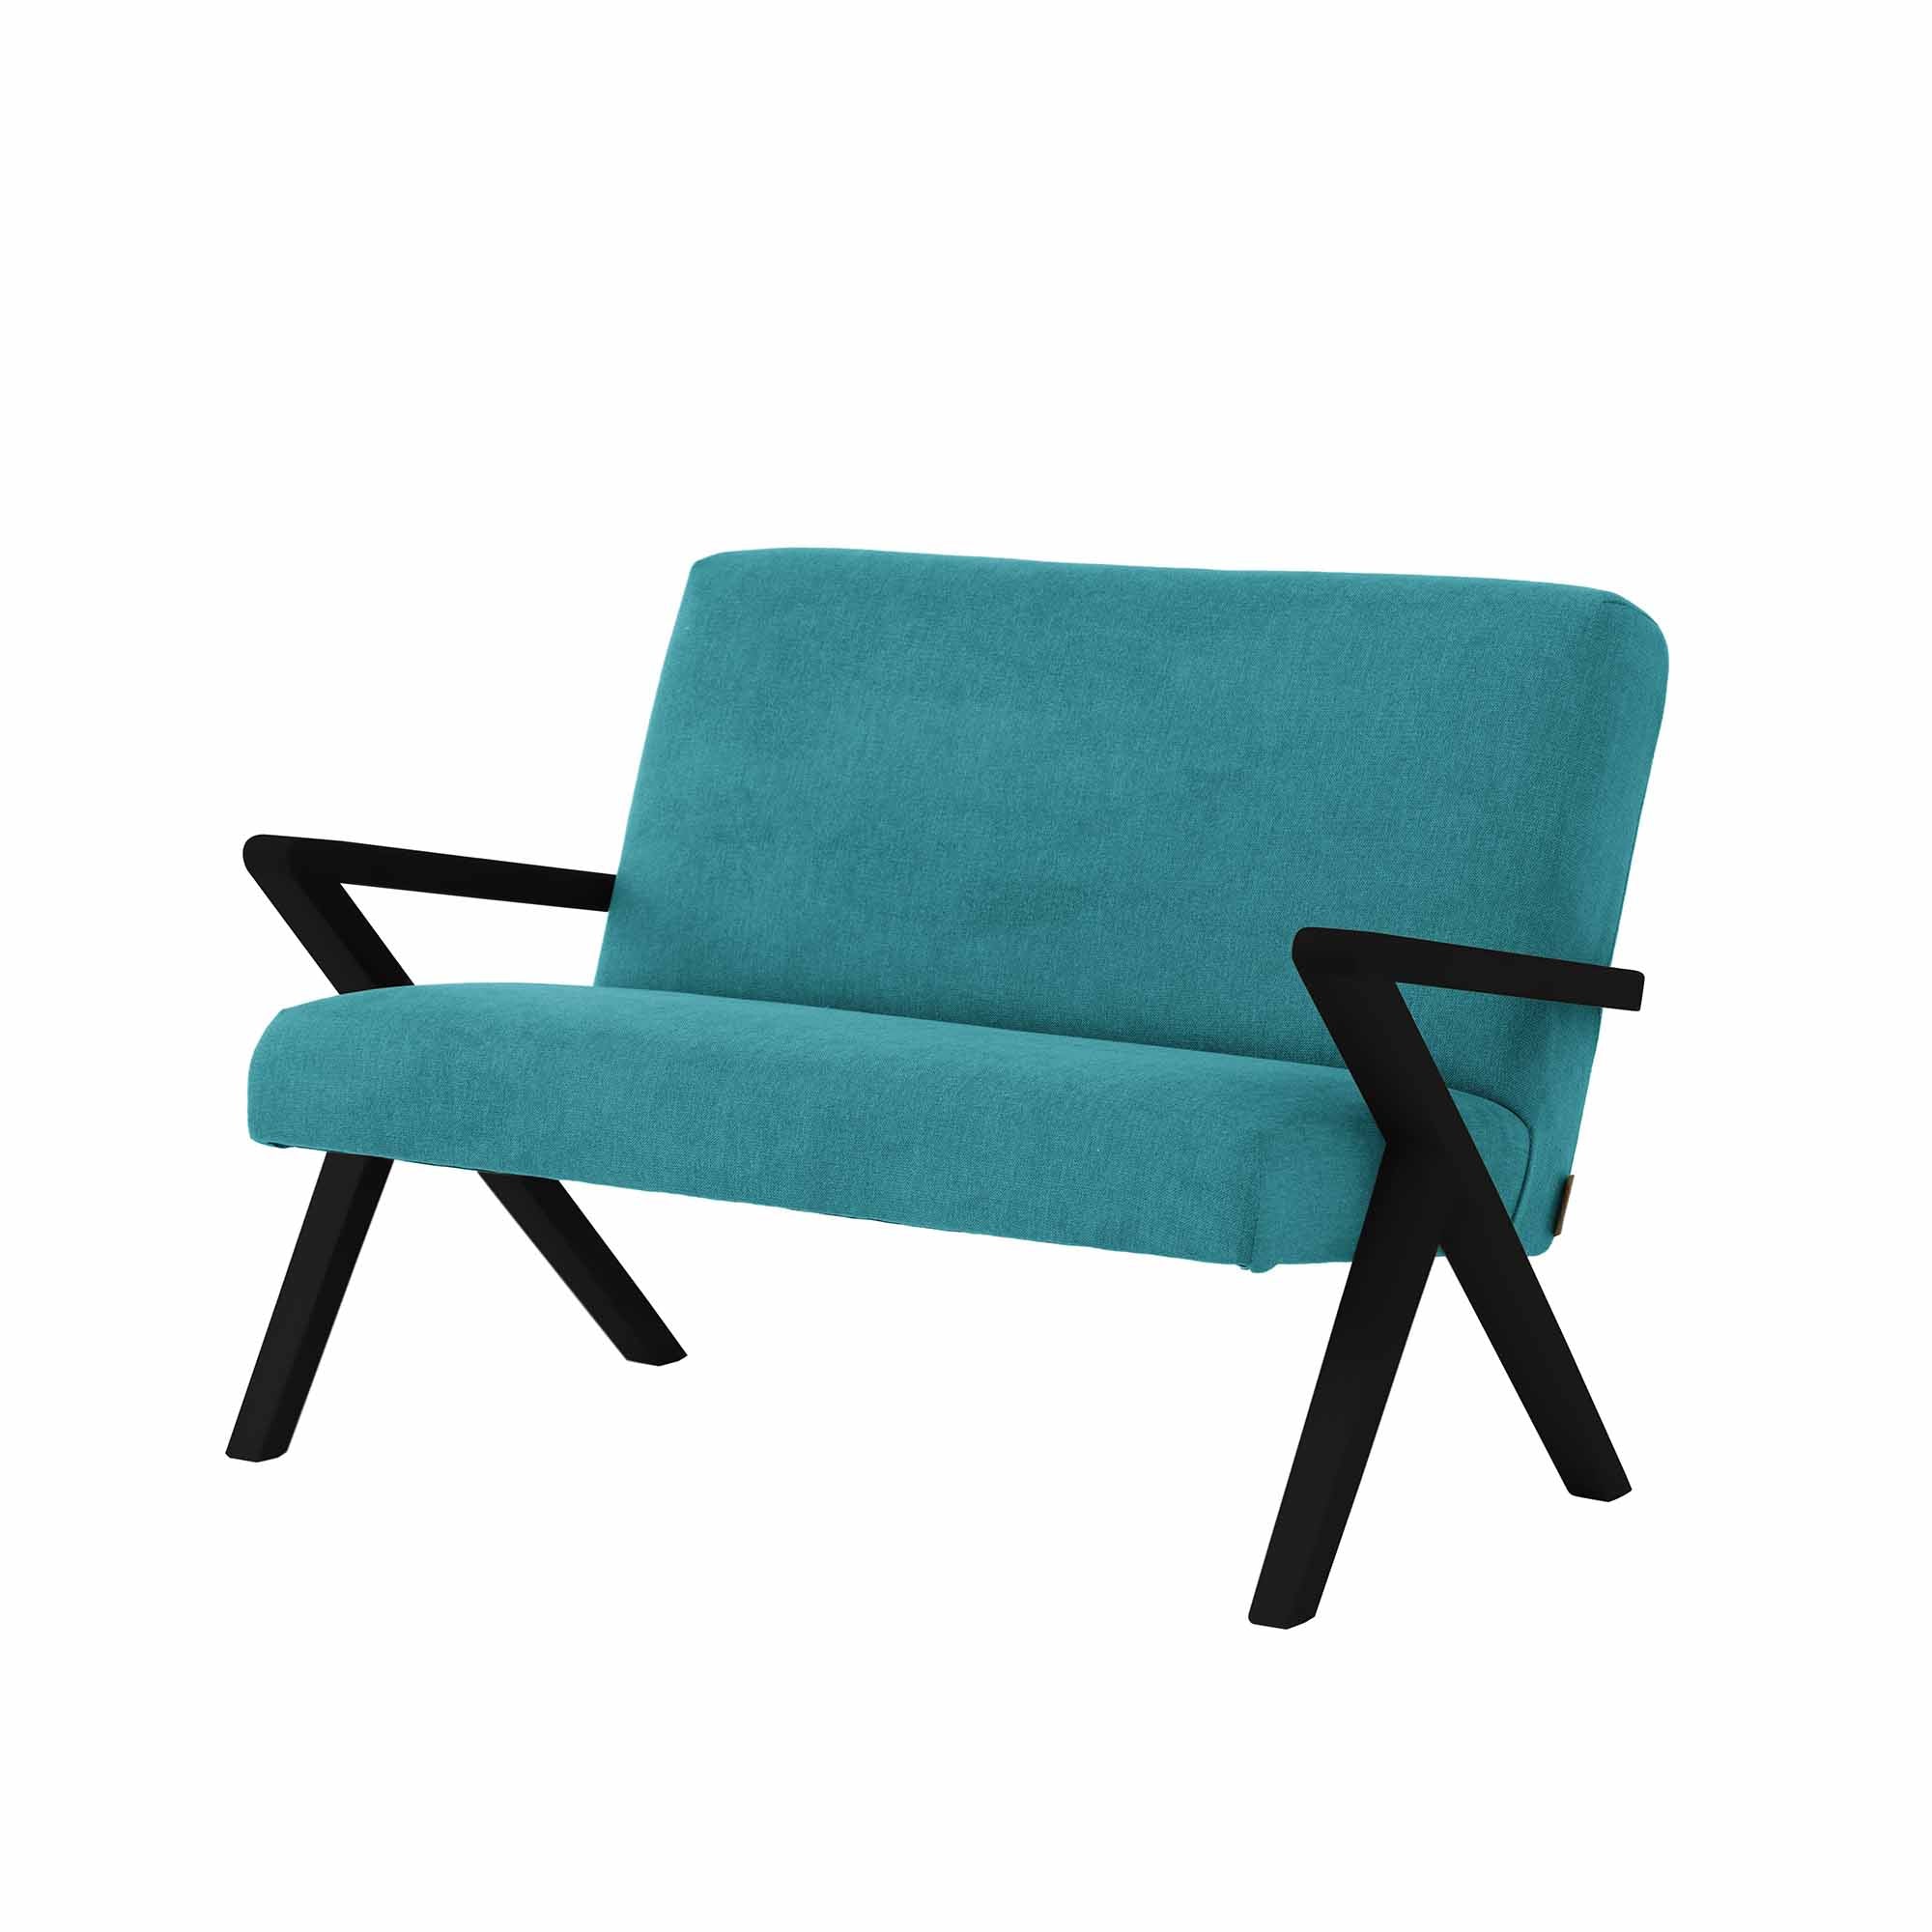  2-Seater Sofa, Beech Wood Frame, Black Lacquered blue fabric, half-side view